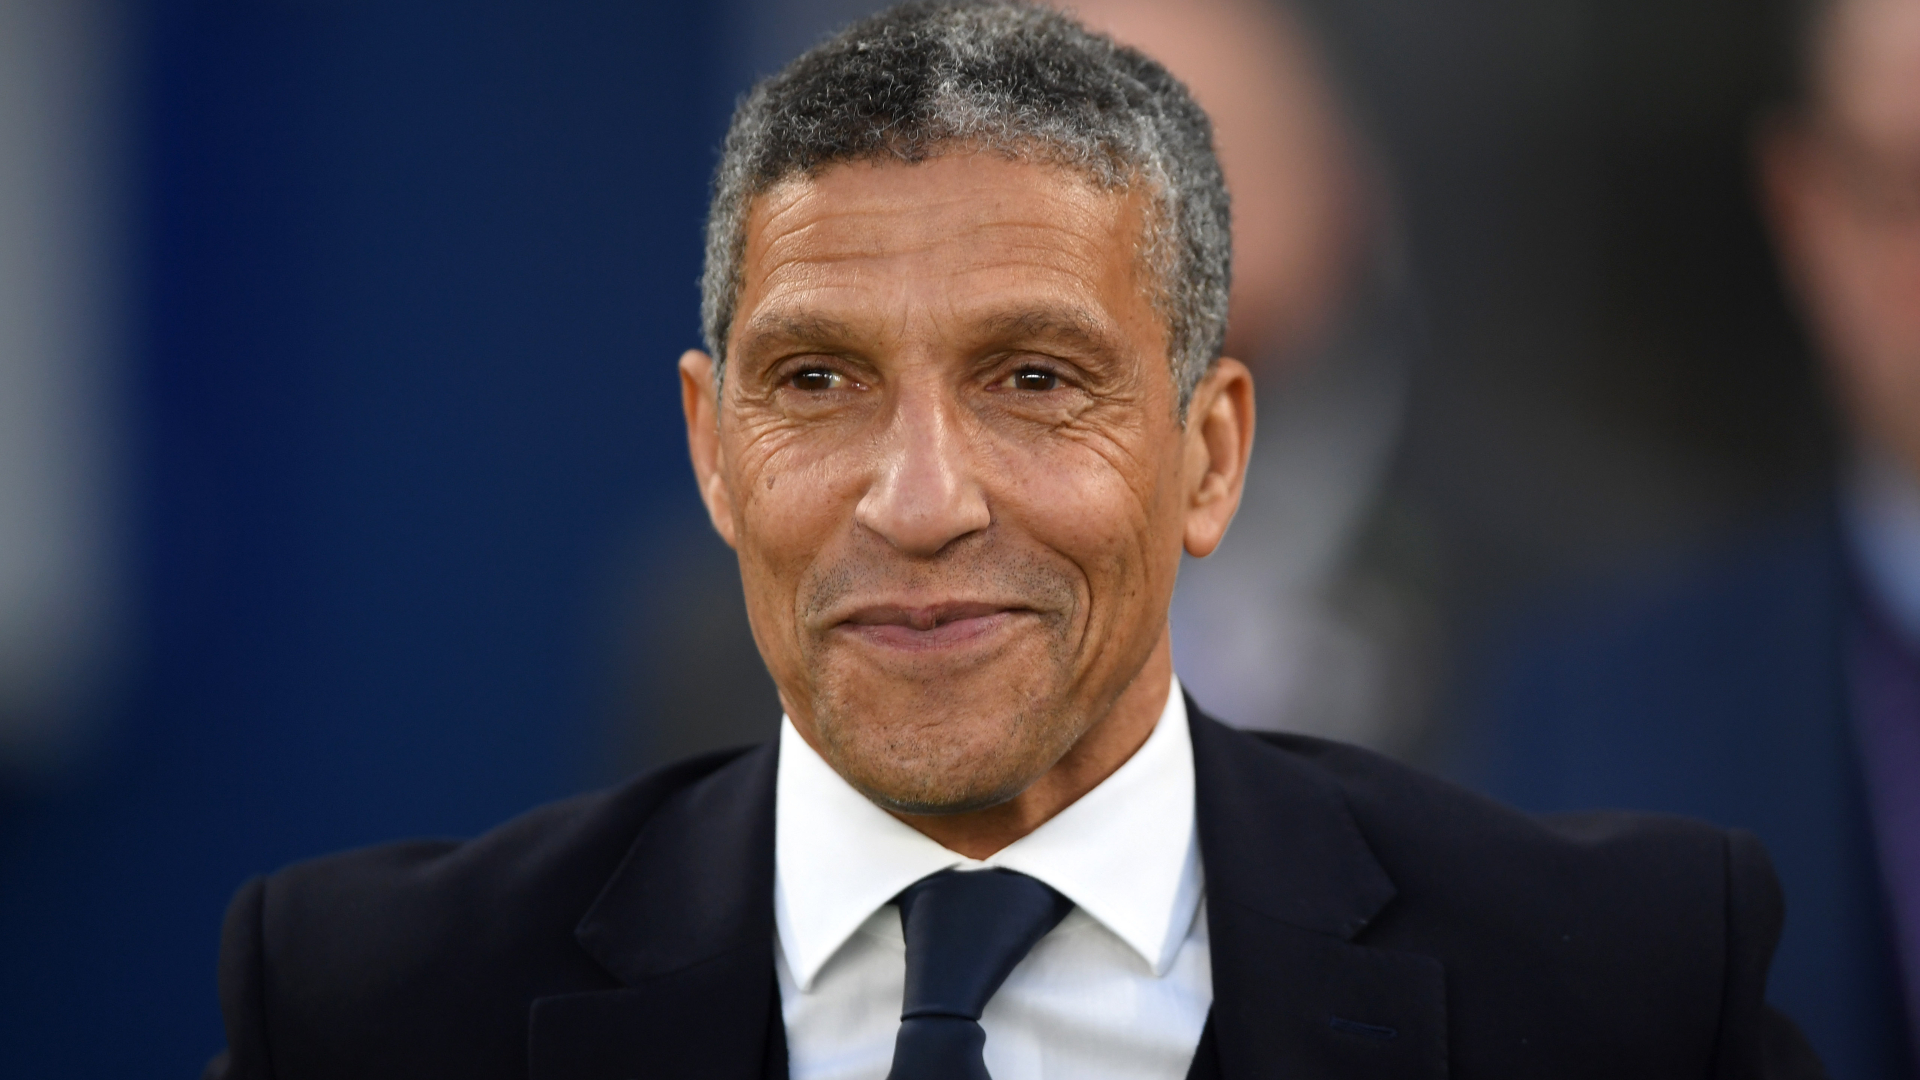 Hughton replaces Lamouchi after Nottingham Forest endure 11-game winless run